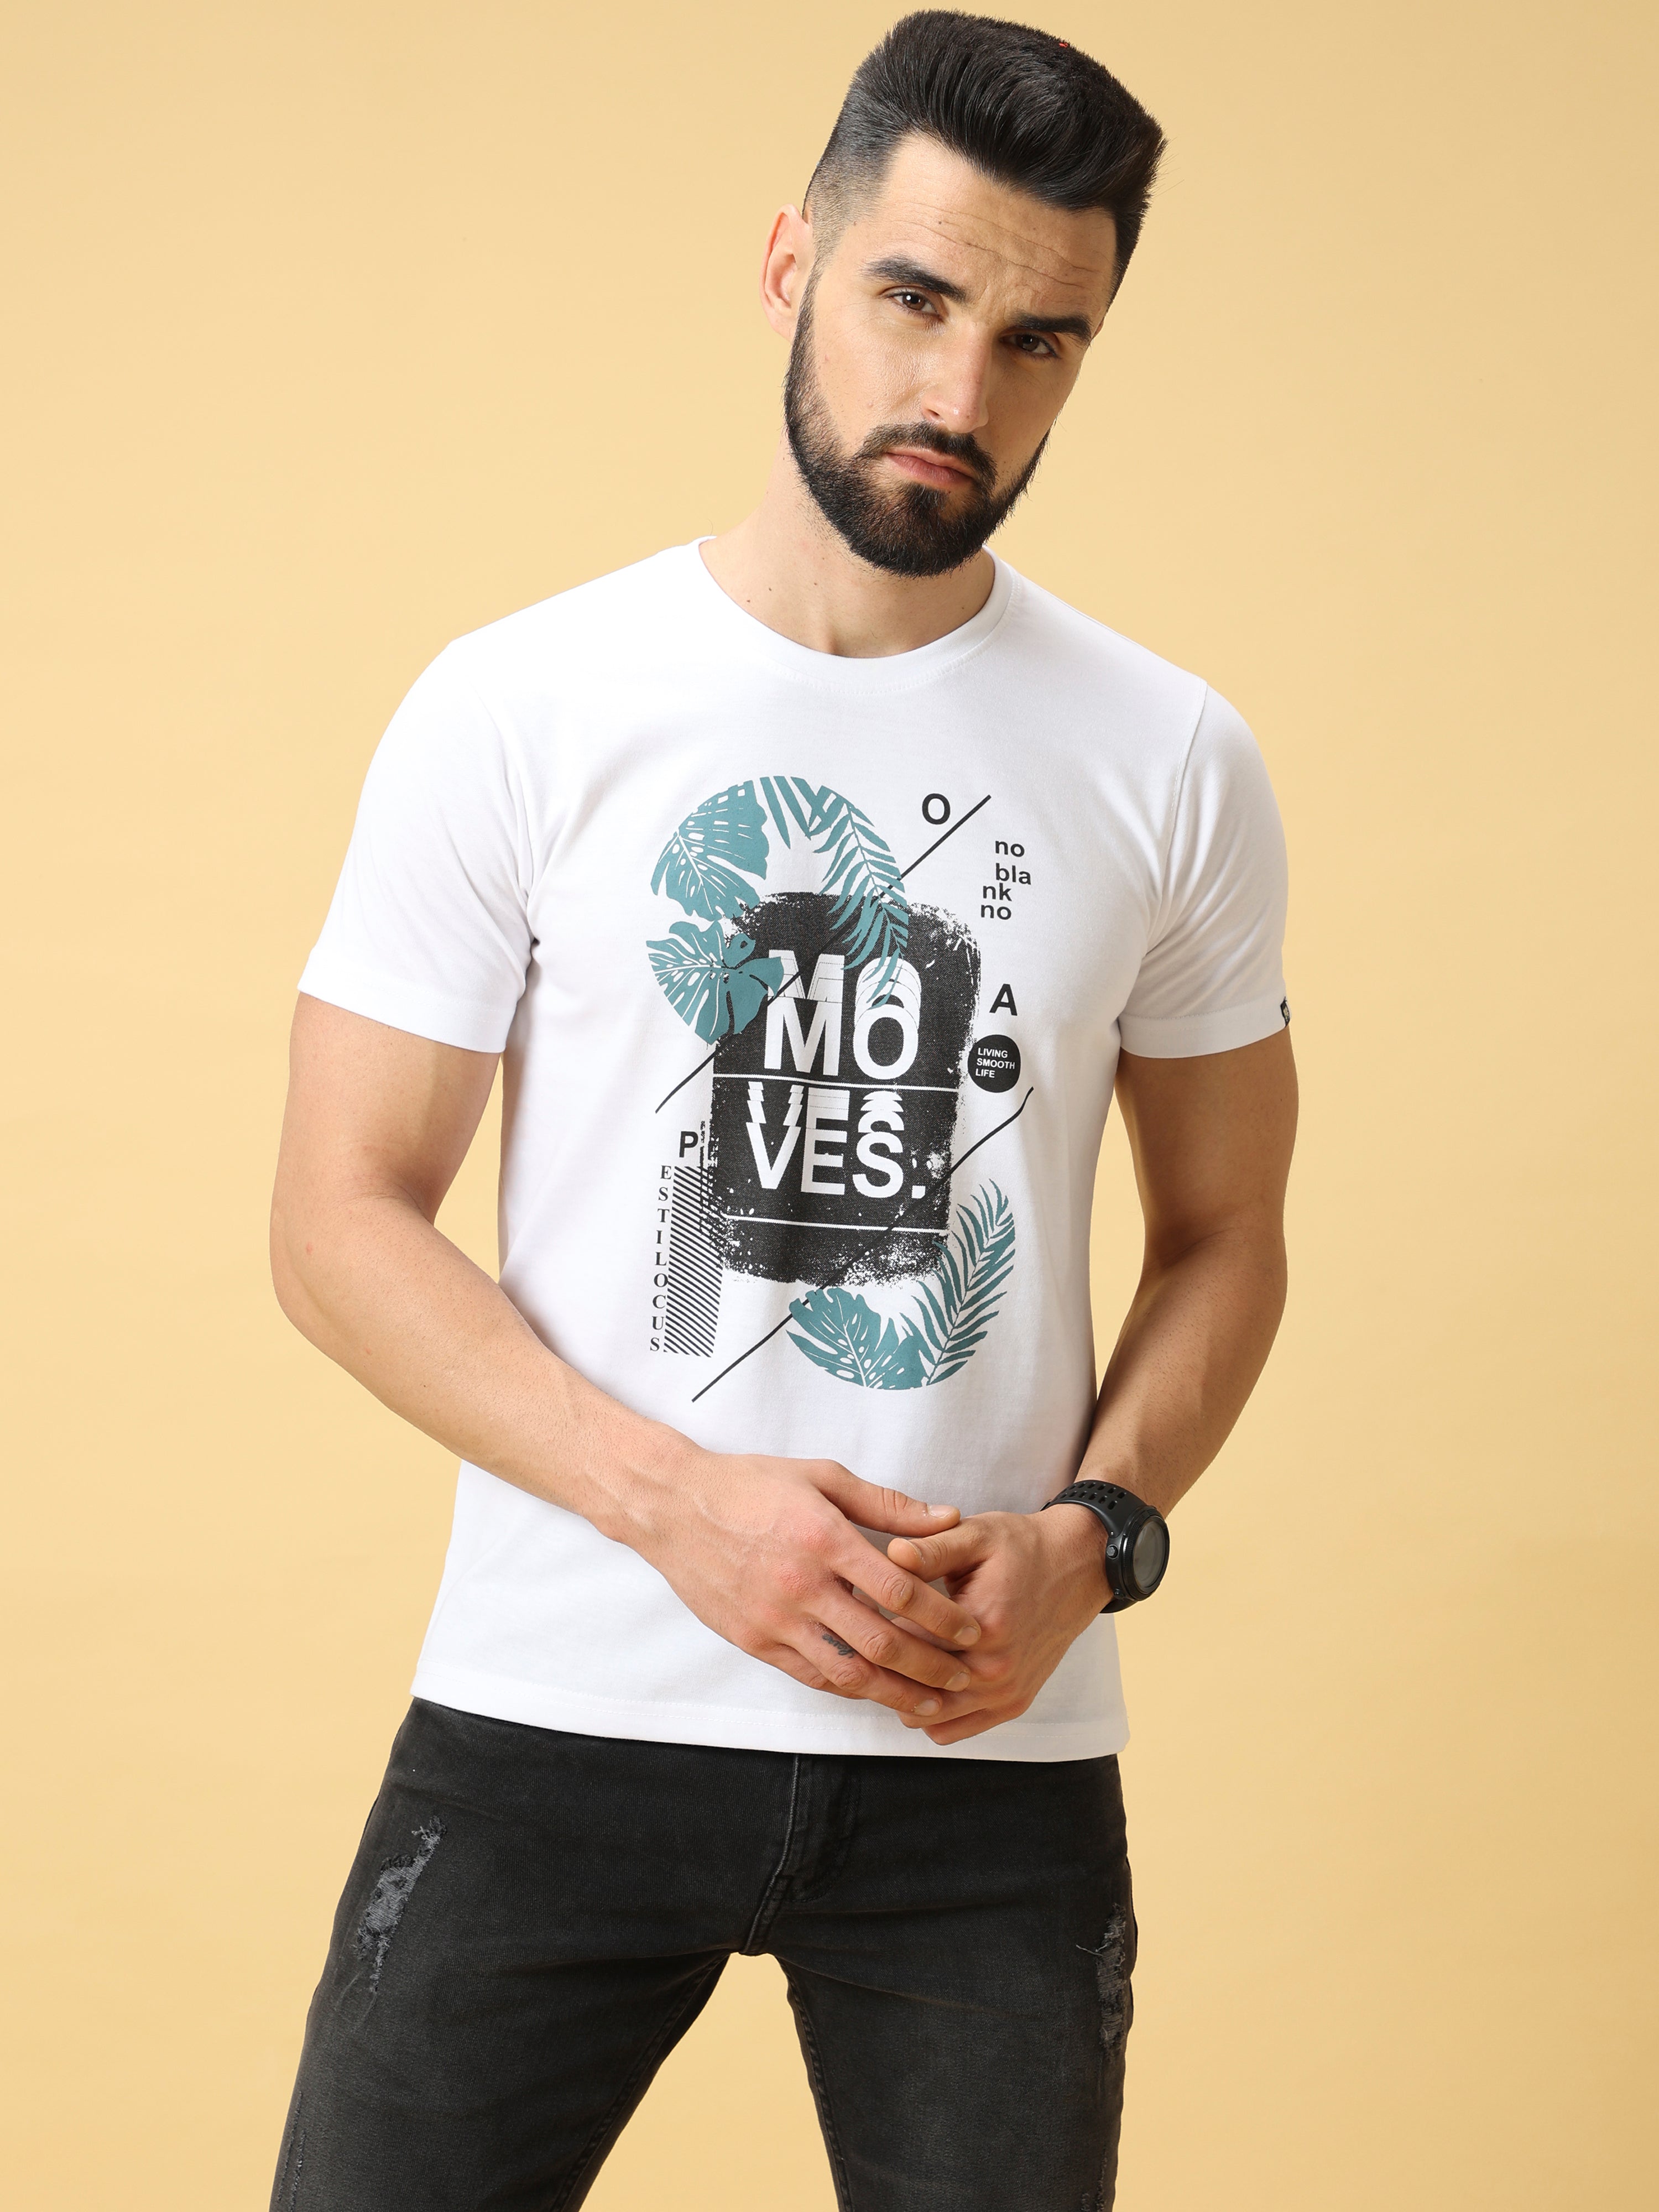 Moves Chest Print Black/Blue Crew Neck T-Shirt shop online at Estilocus. This pure cotton printed T-shirt is a stylish go-to for laidback days. Cut in a comfy regular fit. • 100% Cotton knitted interlock 190GSM• Bio washed fabric• Round neck T-shirt • Hal